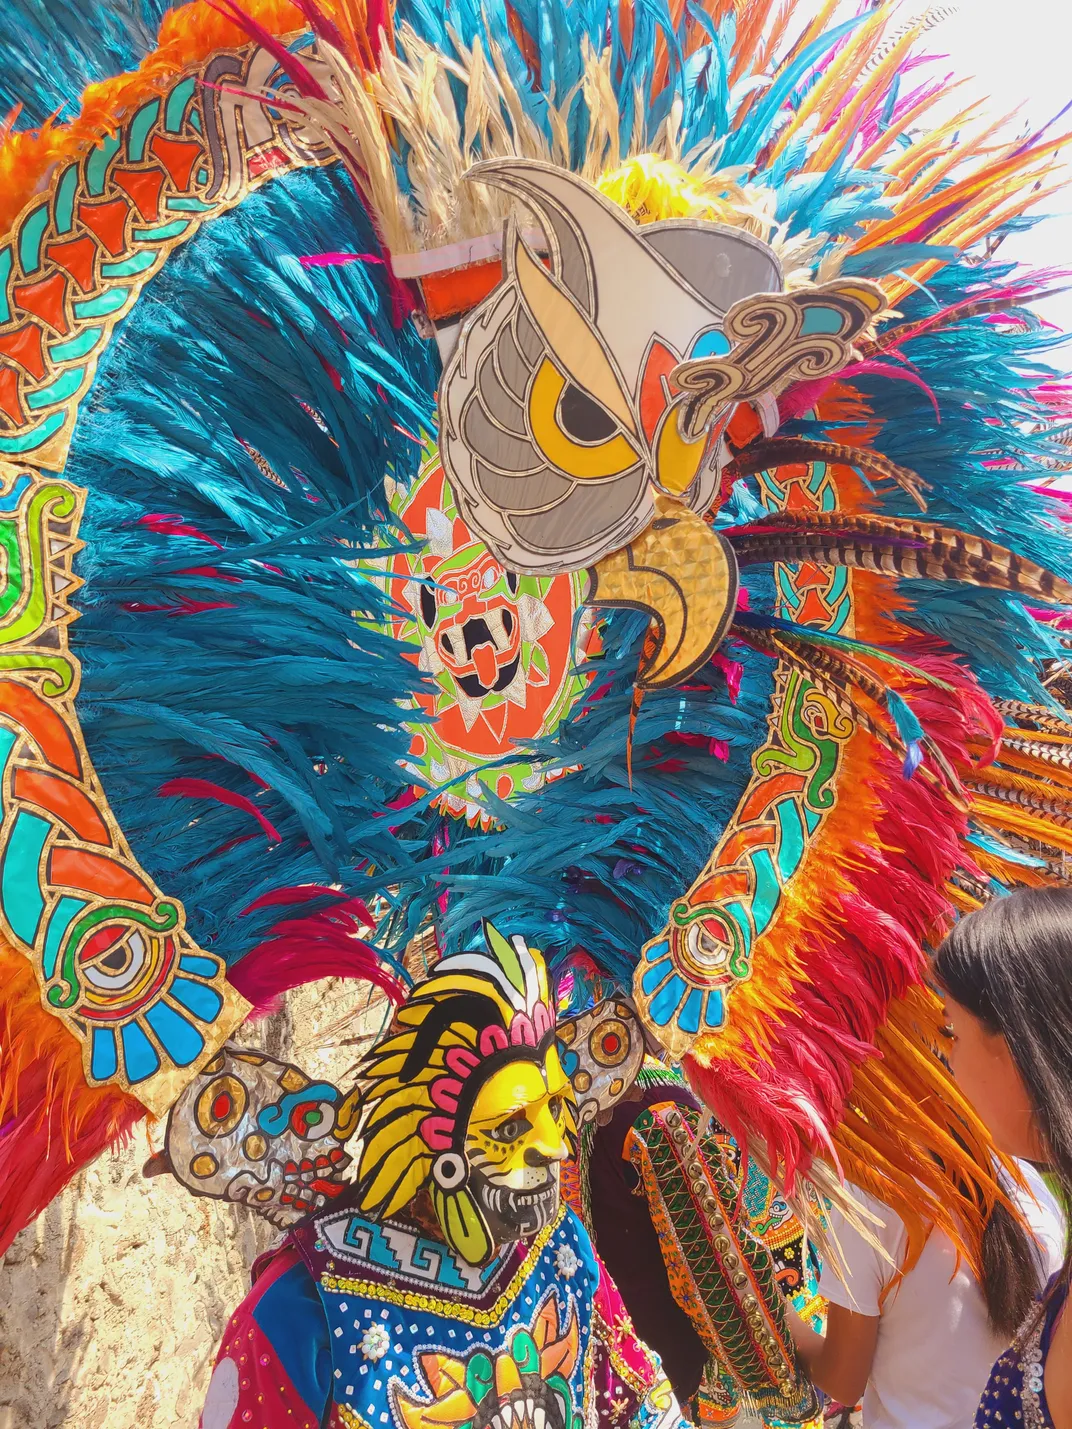 A large headdress depicts a colorful bird with its feathers on full display